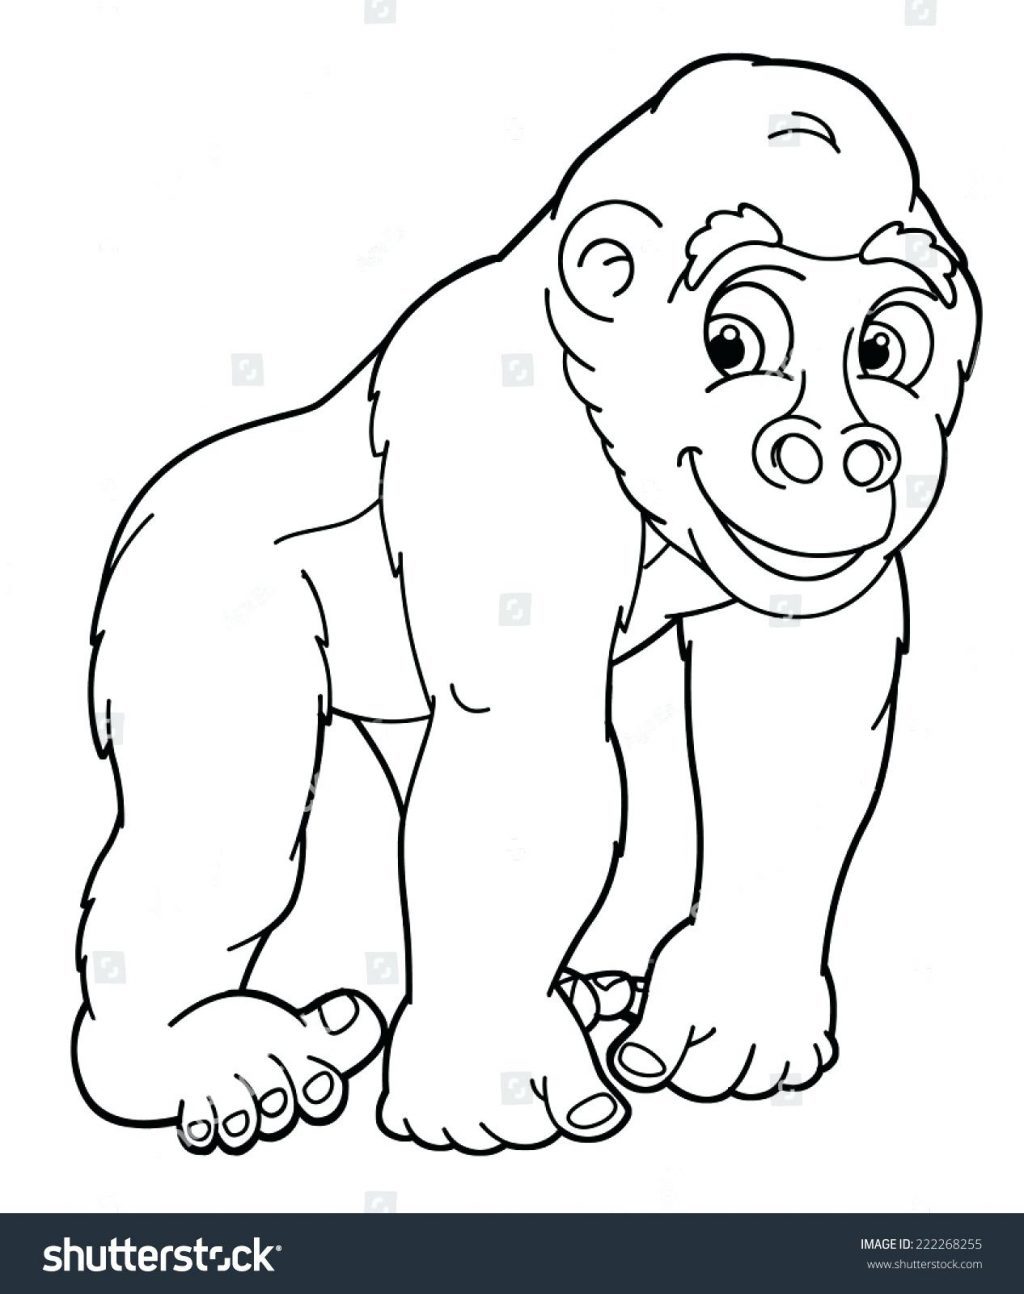 Mountain Gorilla Coloring Pages at GetDrawings | Free download